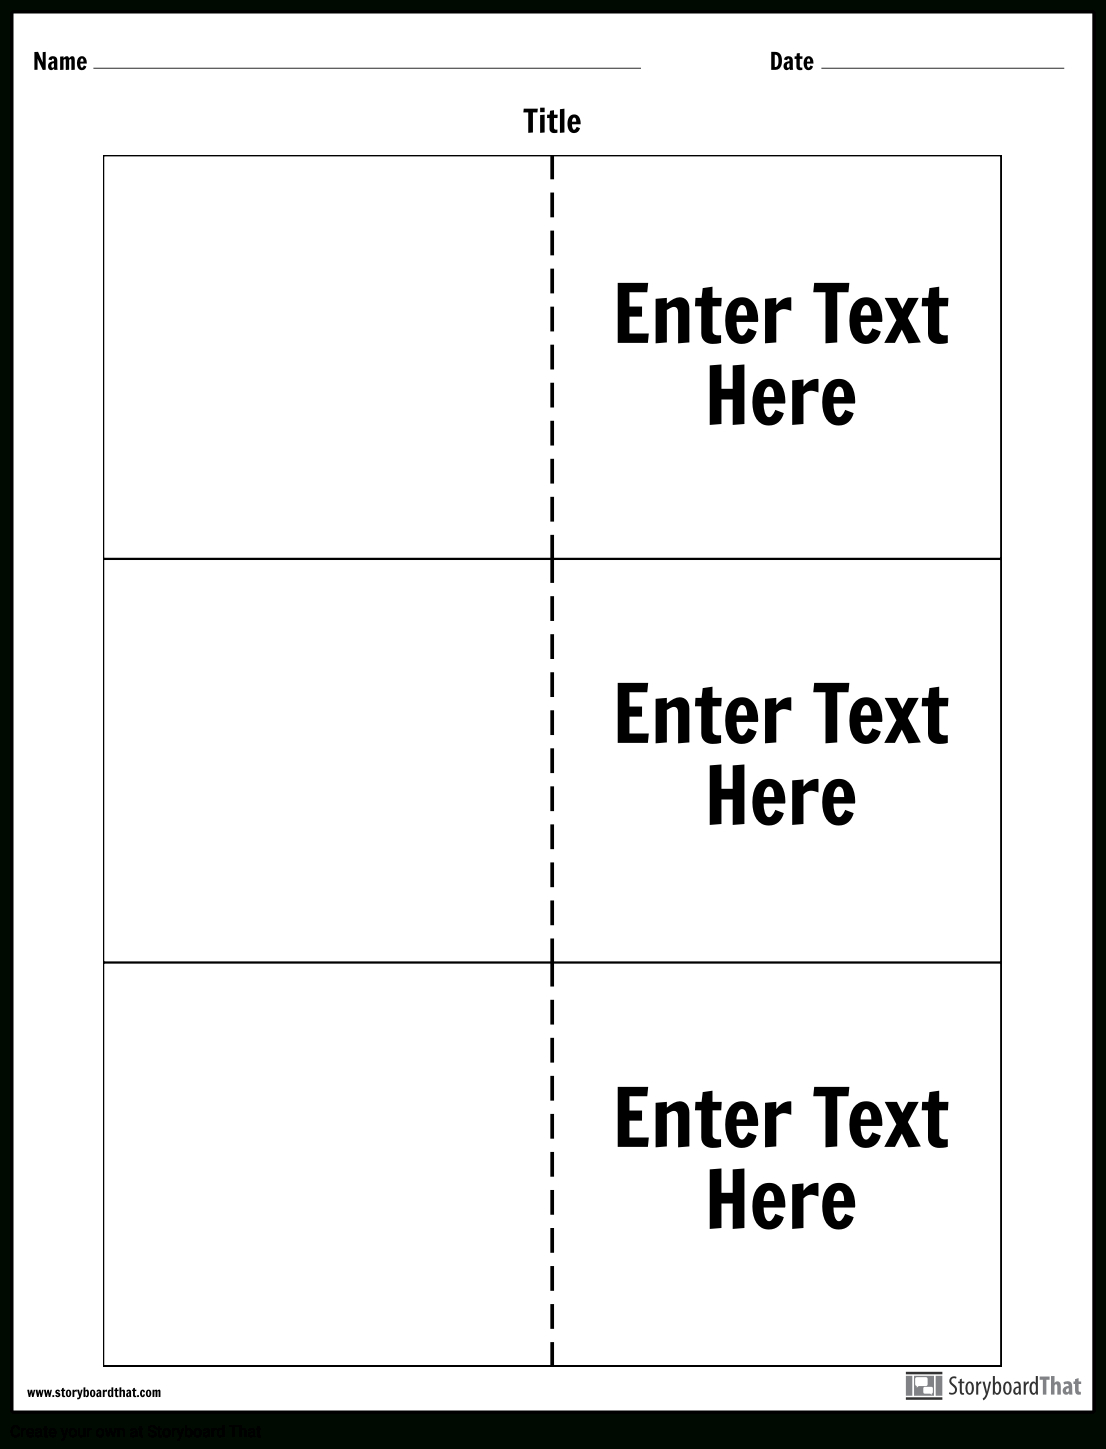 Make Printable Flashcards | Flashcard Templates Intended For Word Cue Card Template